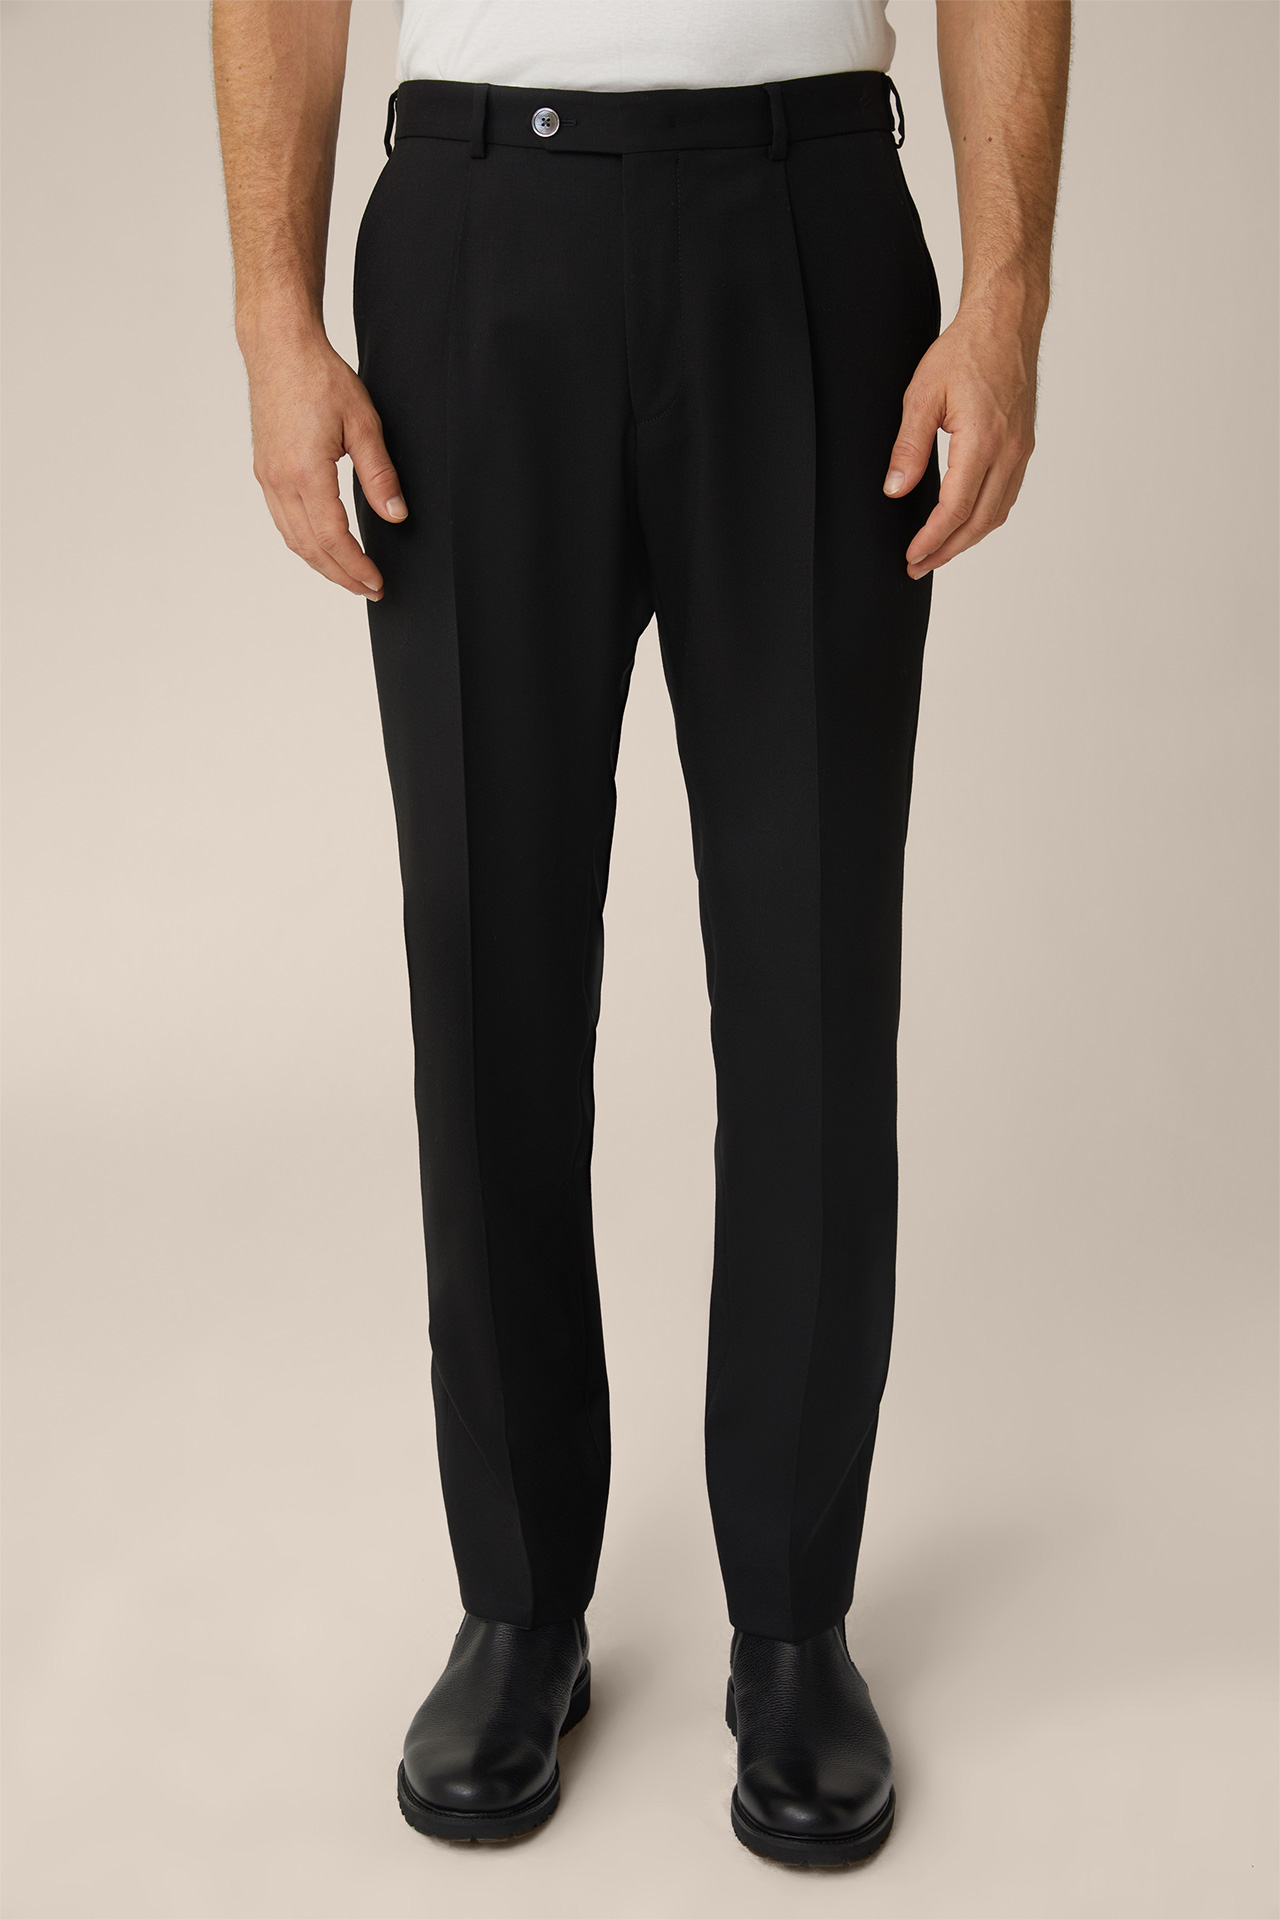 Frero Virgin Wool Modular Trousers with Pleat-front in Black